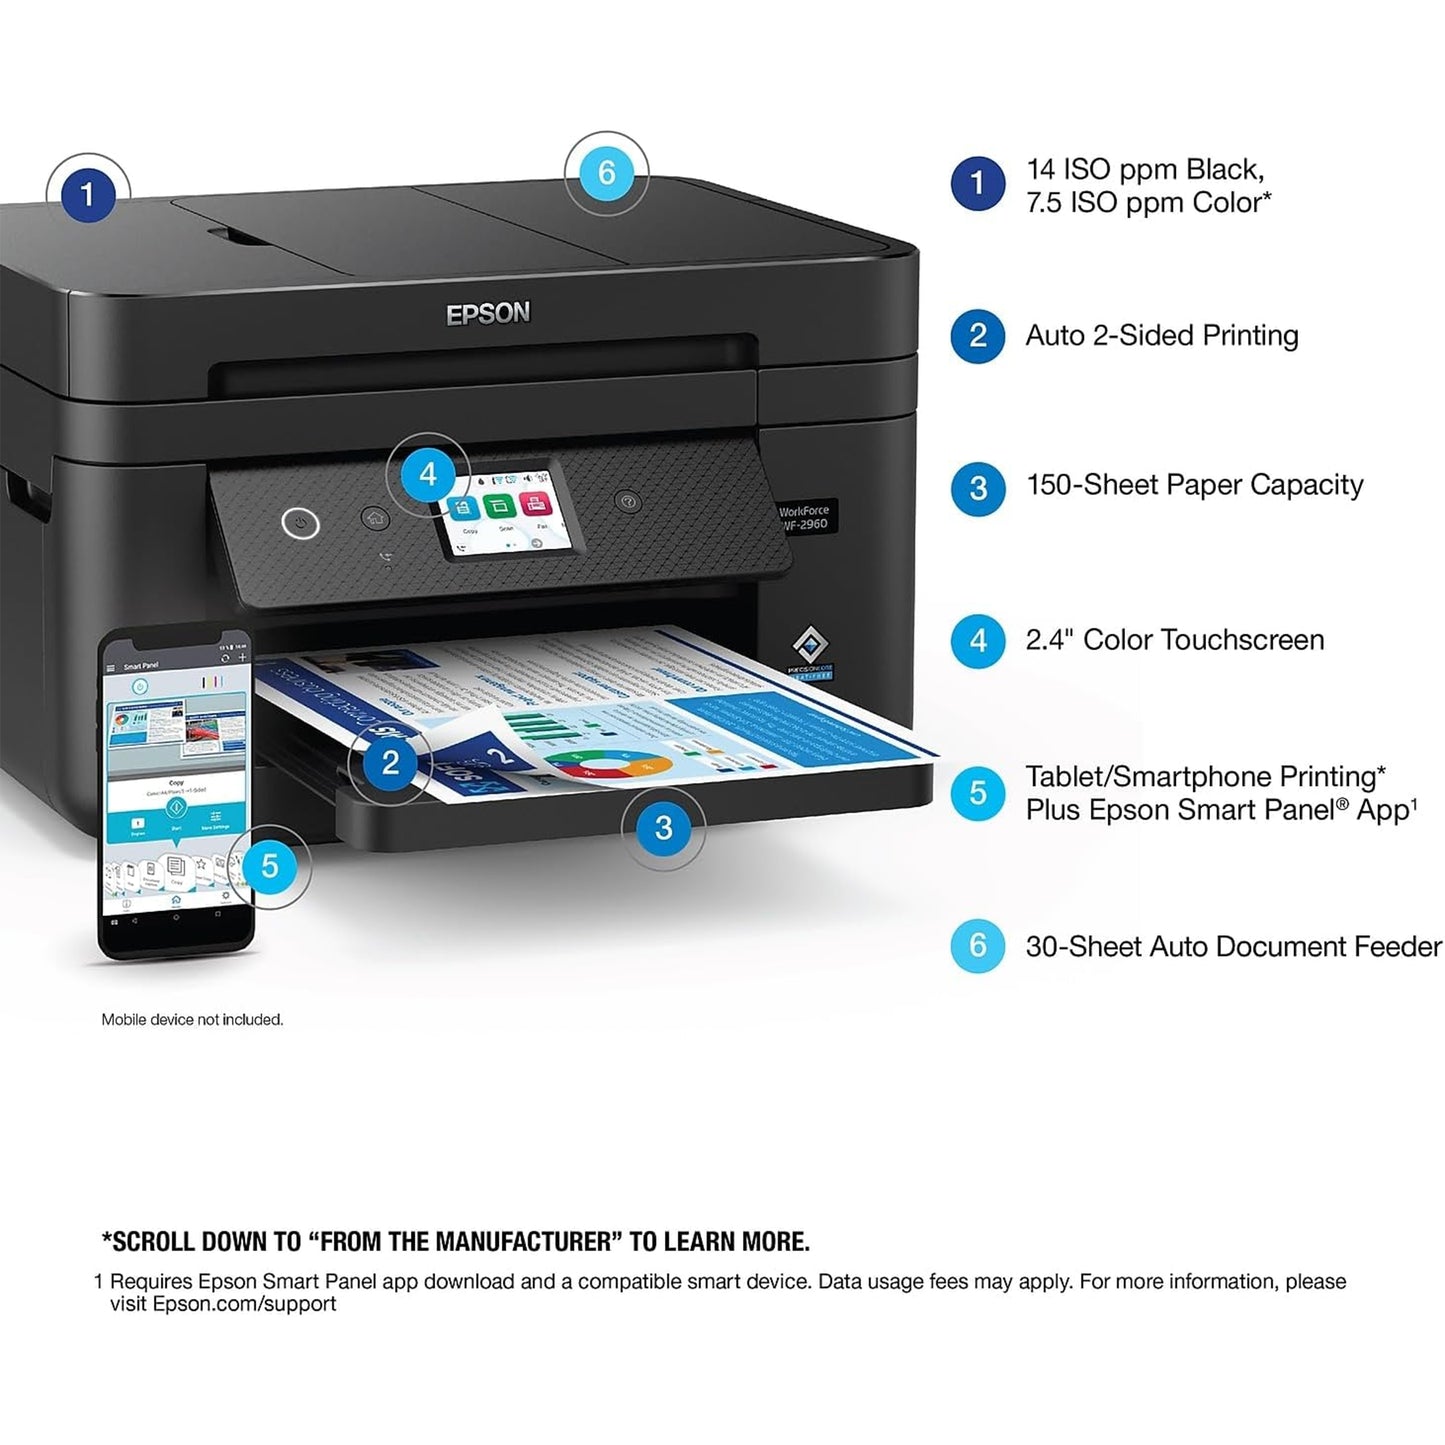 Epson Workforce WF-2960 Wireless All-in-One Printer with Scan, Copy, Fax, Auto Document Feeder, Automatic 2-Sided Printing, 2.4" Touchscreen Display, 150-Sheet Paper Tray and Ethernet,Black